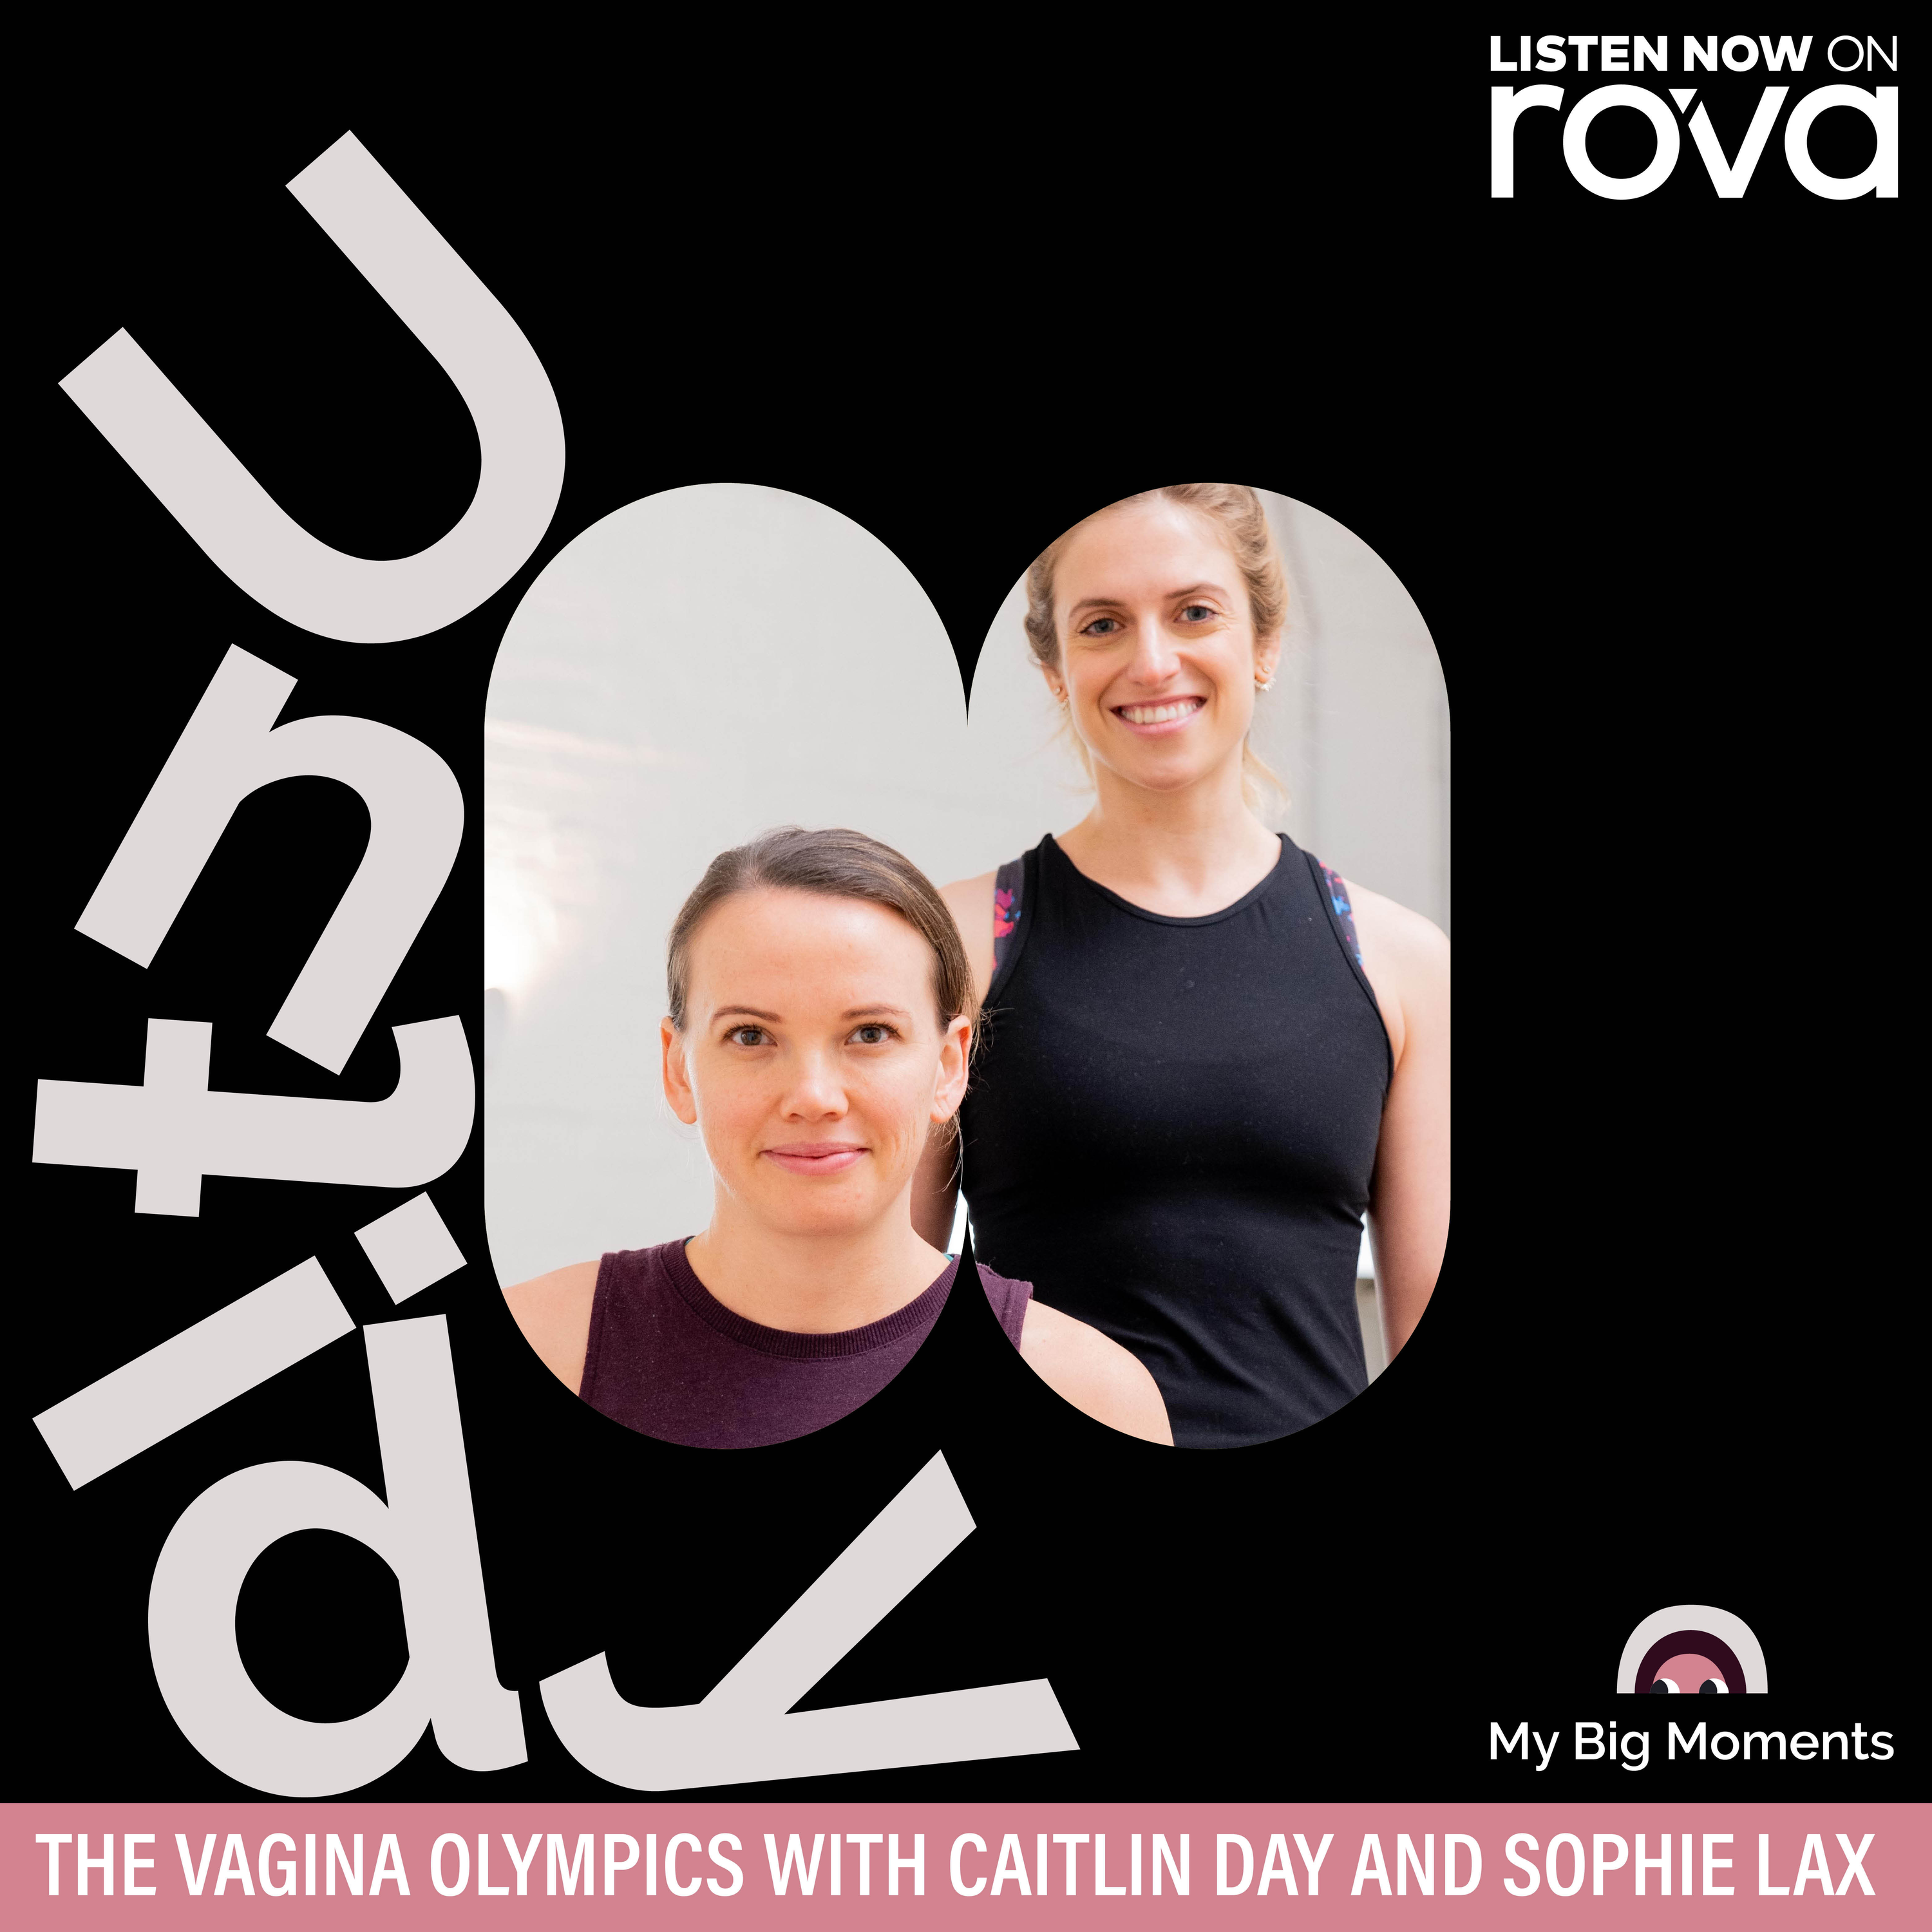 The Vagina Olympics with Caitlin Day and Sophie Lax